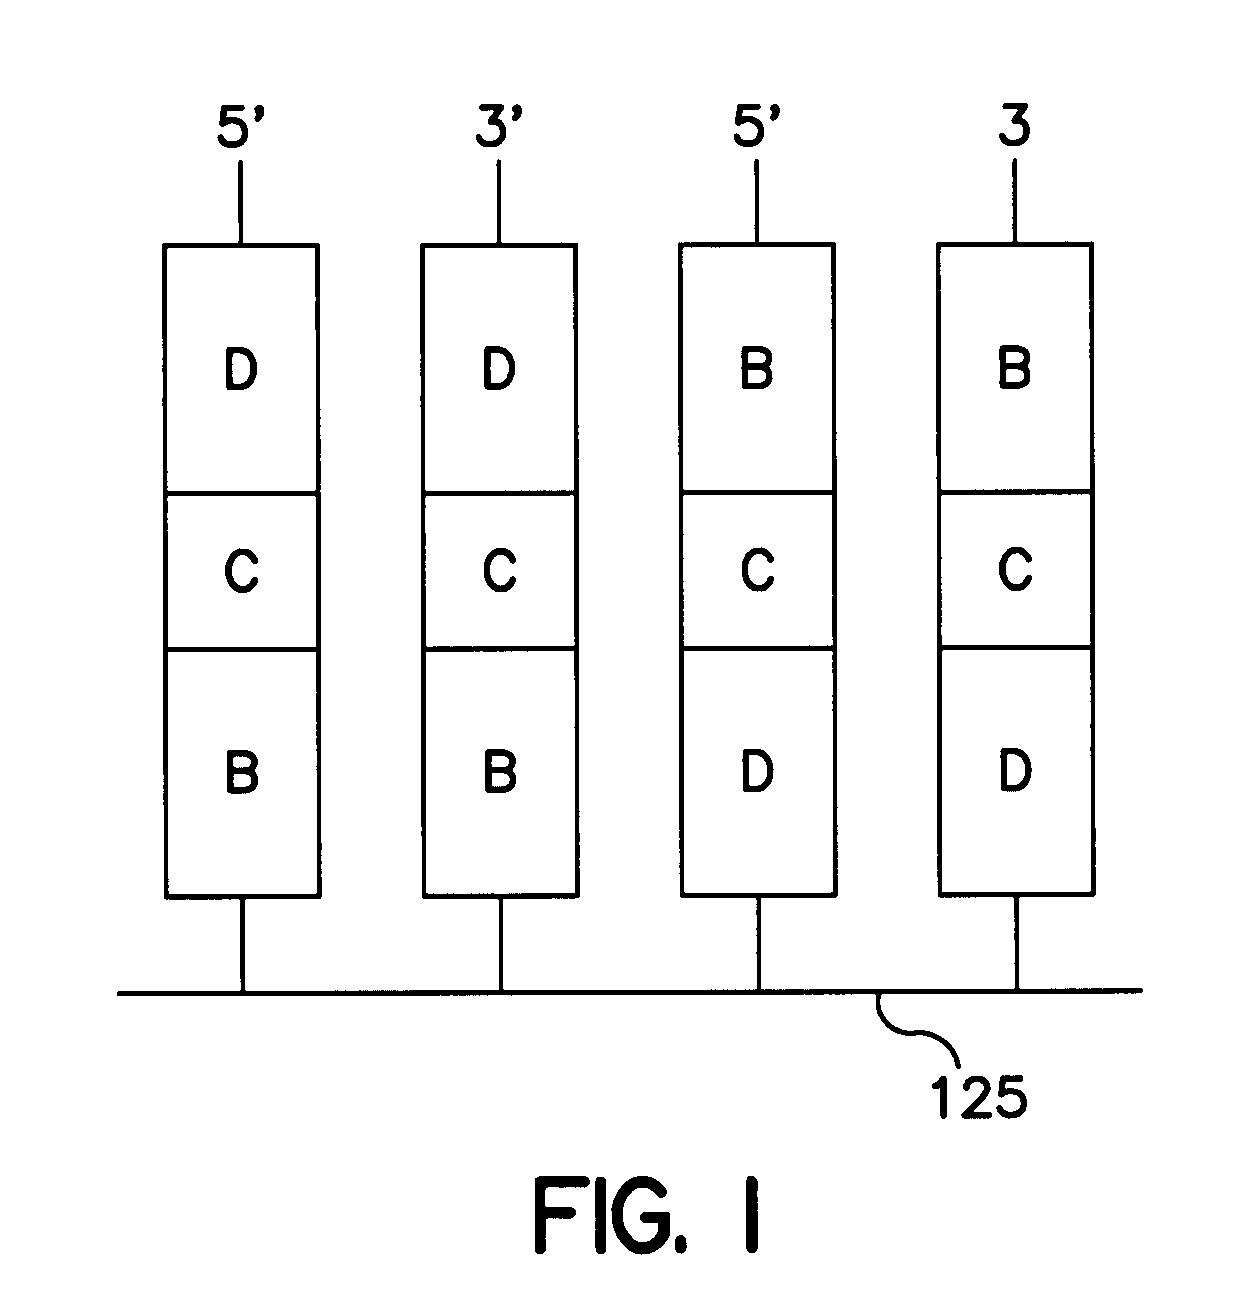 Universal microarray system